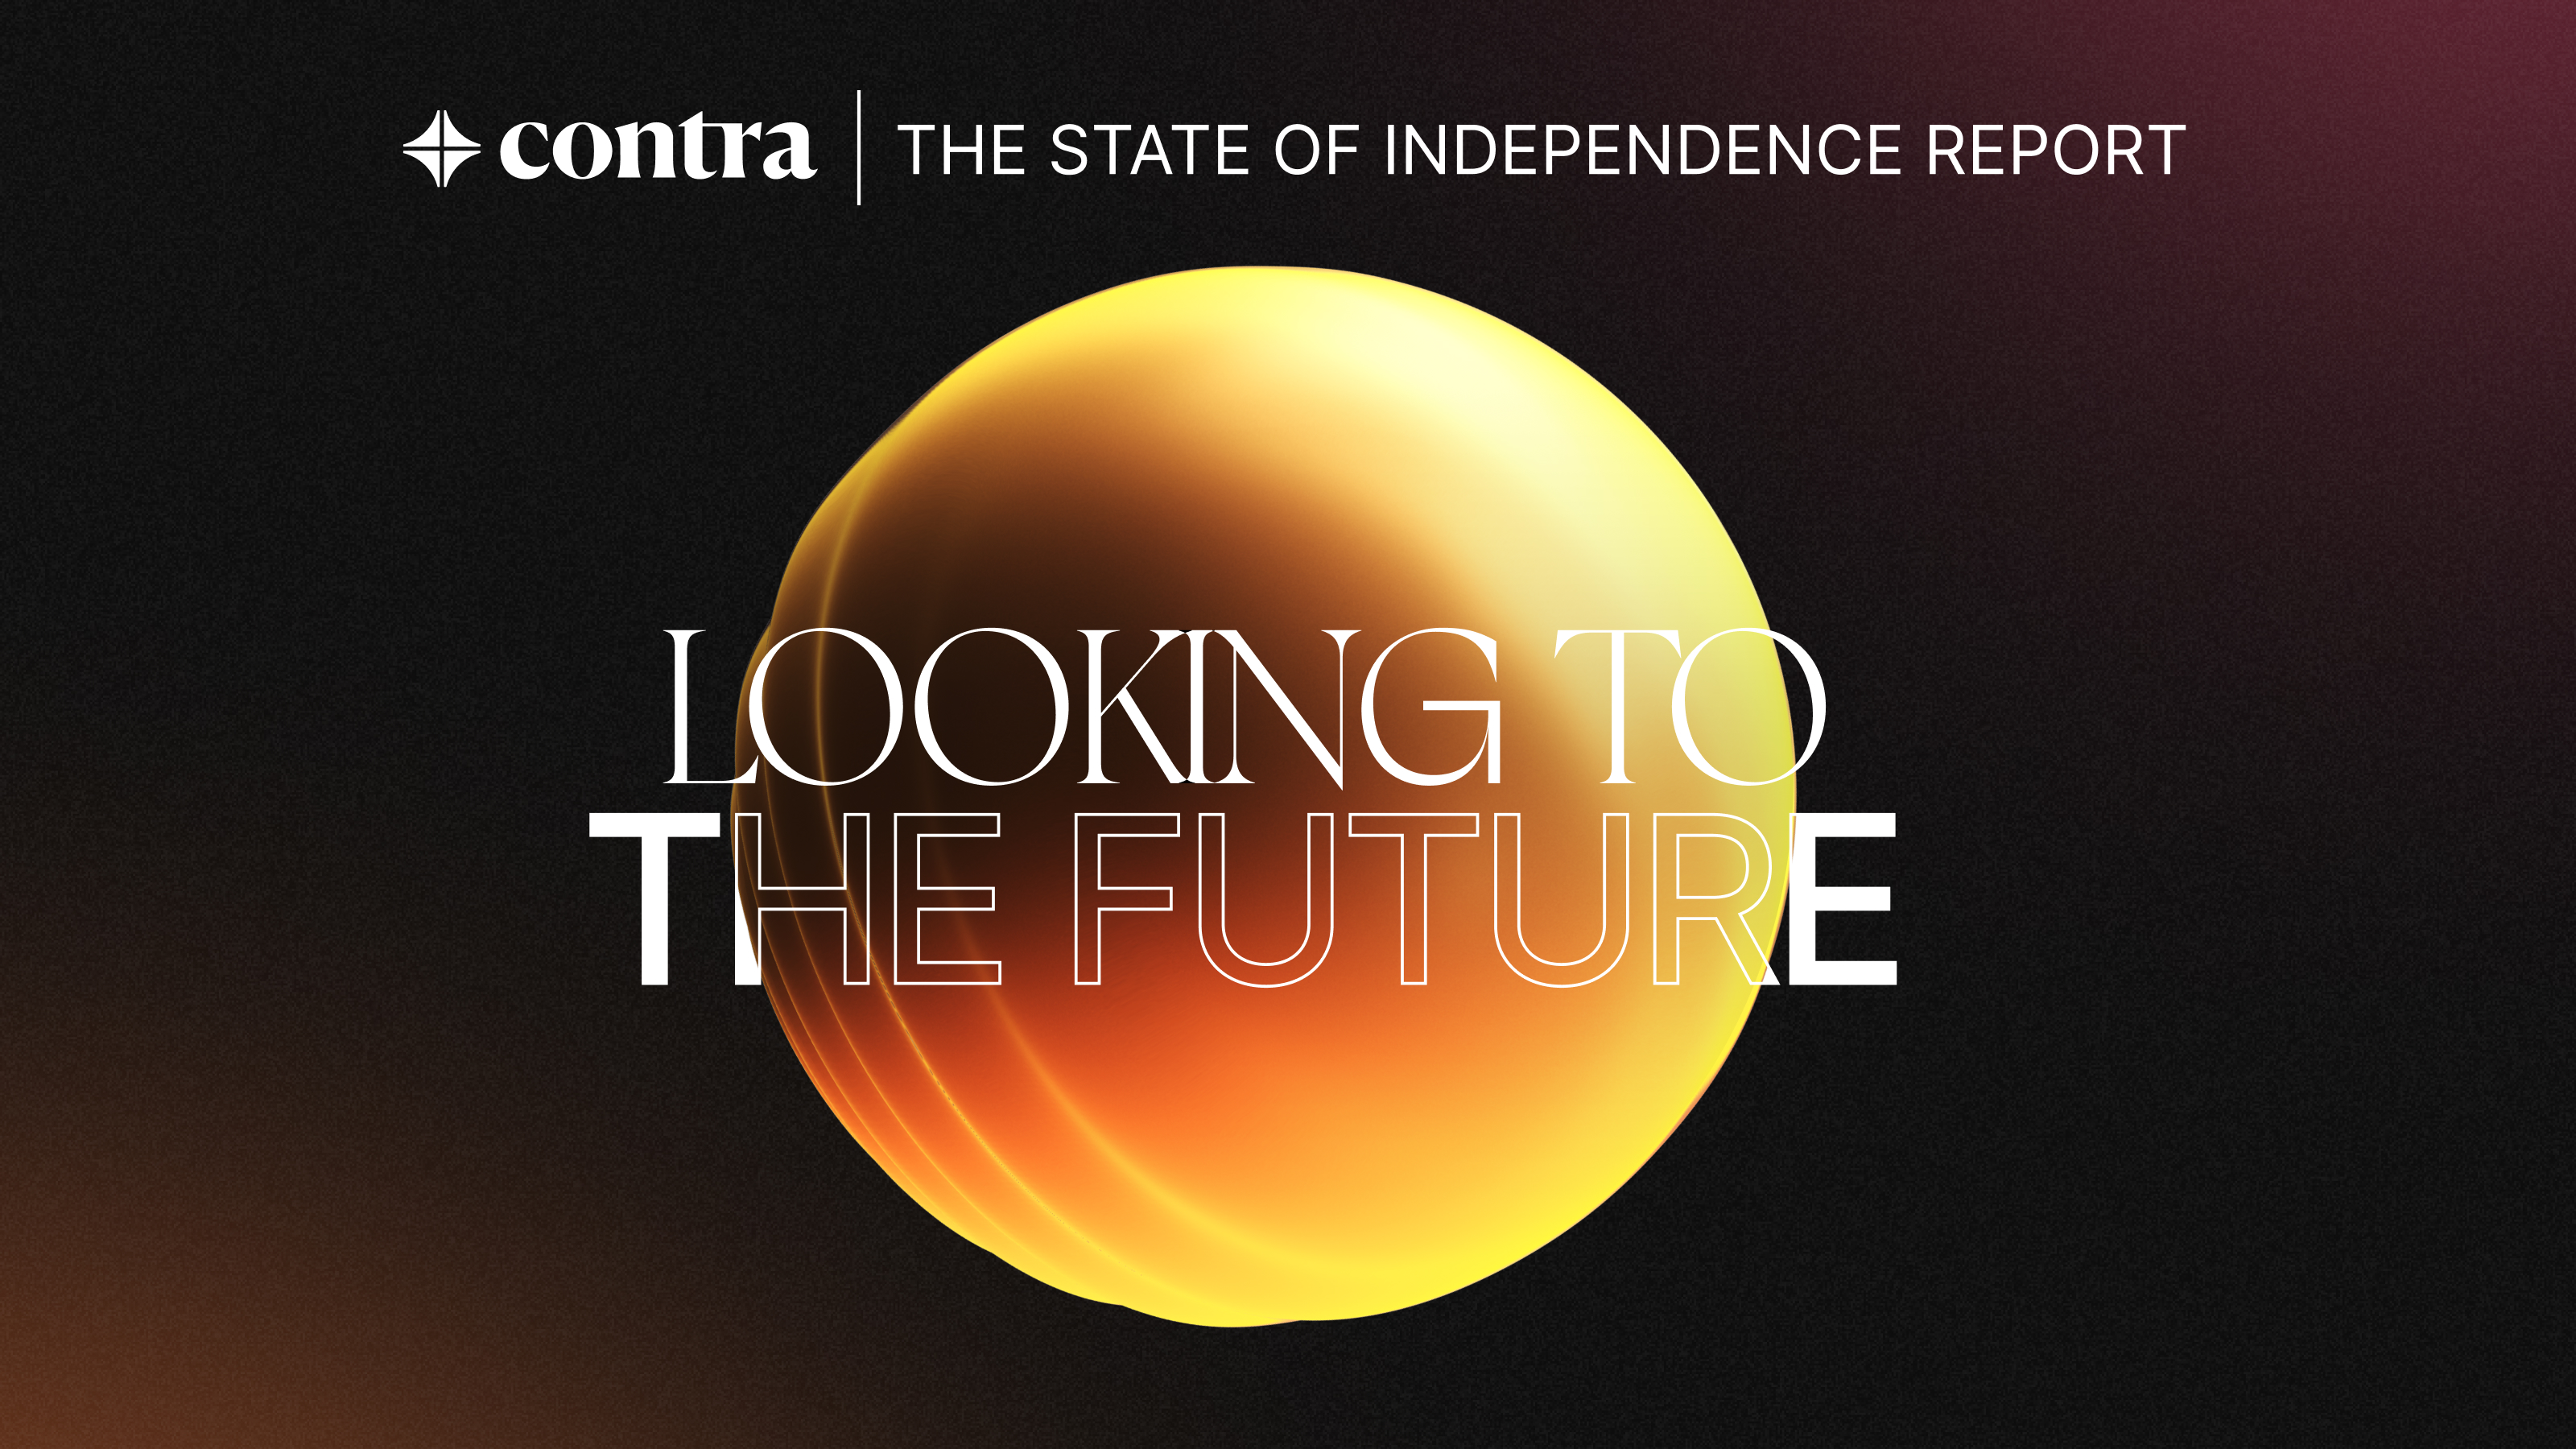 Find pricing, reviews and other details about The State of Independence Report